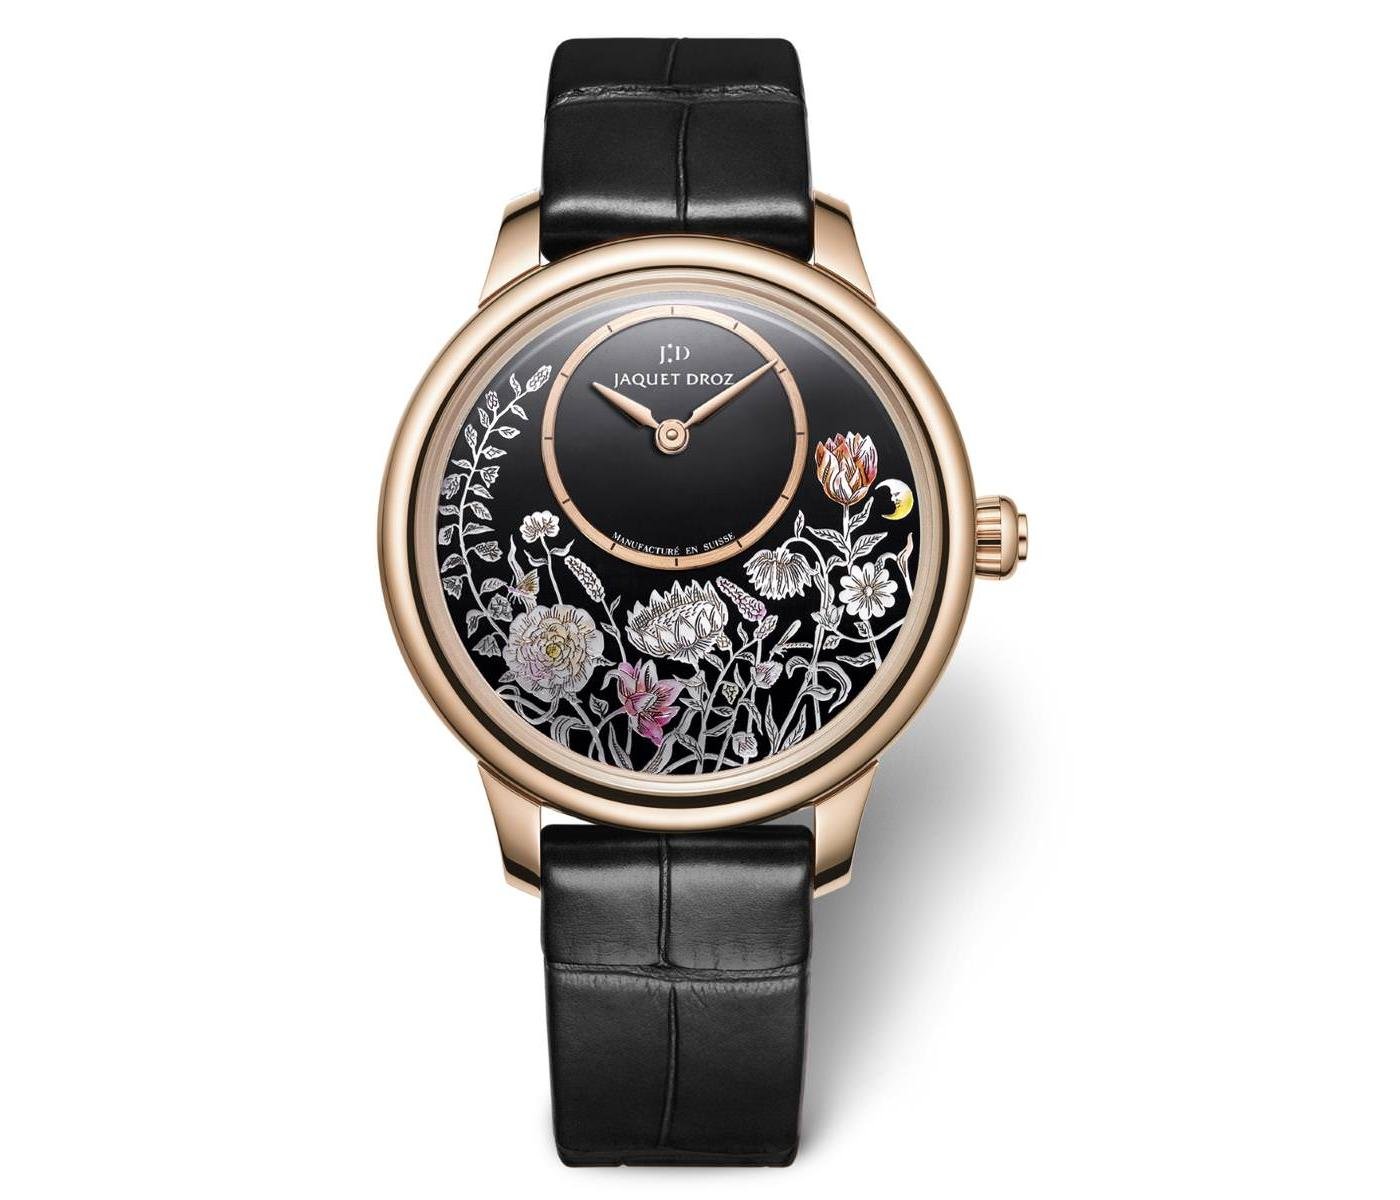 Watch By Jaquet Droz